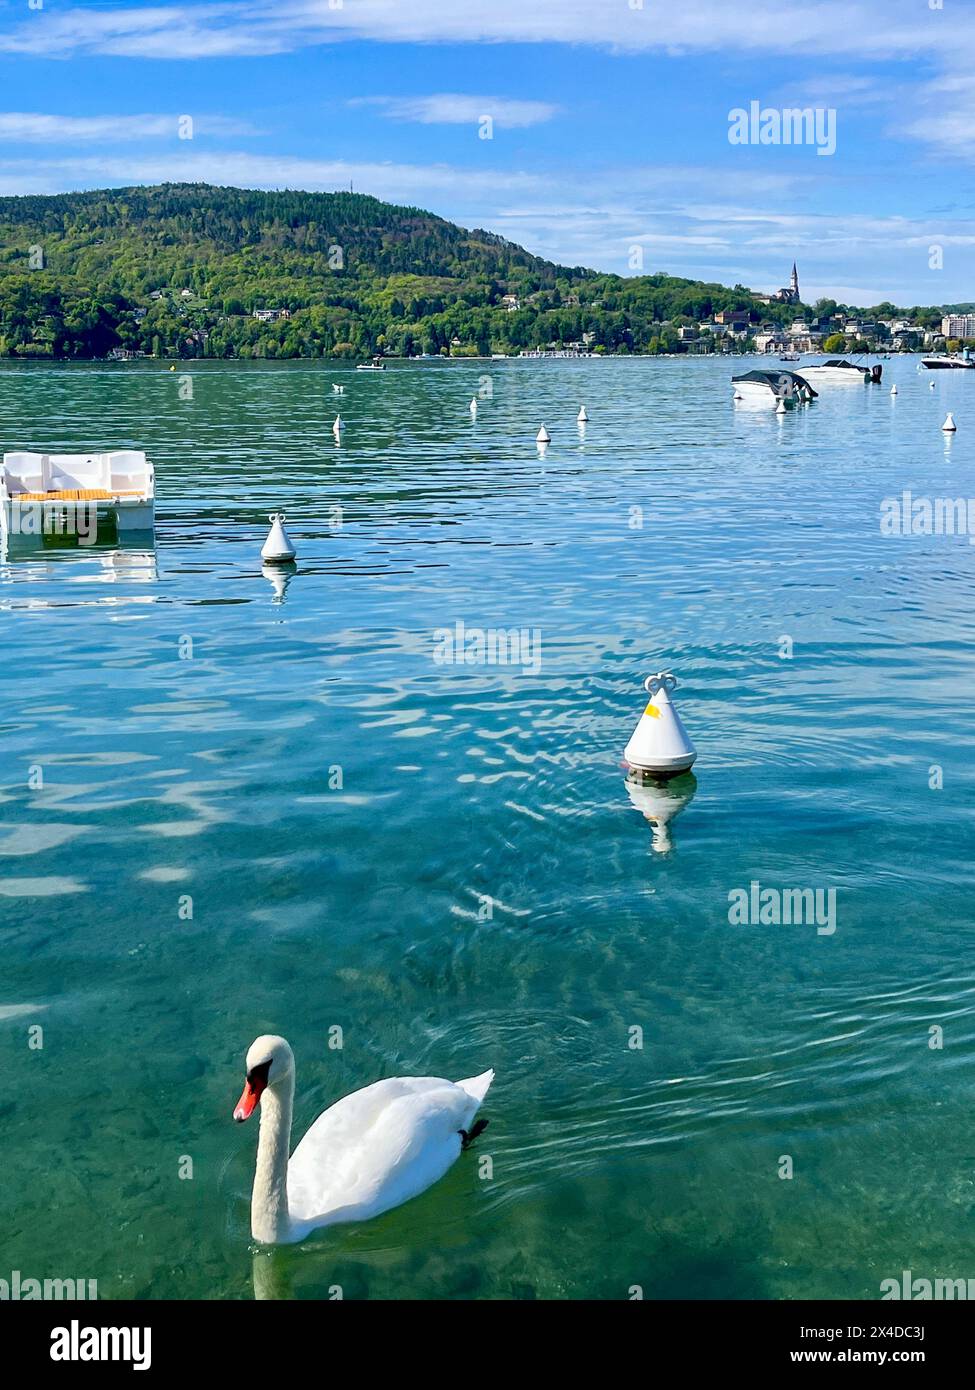 Haute-Savoie, France: a swan in the Annecy lake, known for being the cleanest in Europe due to strict environmental regulations in place since 1960s Stock Photo